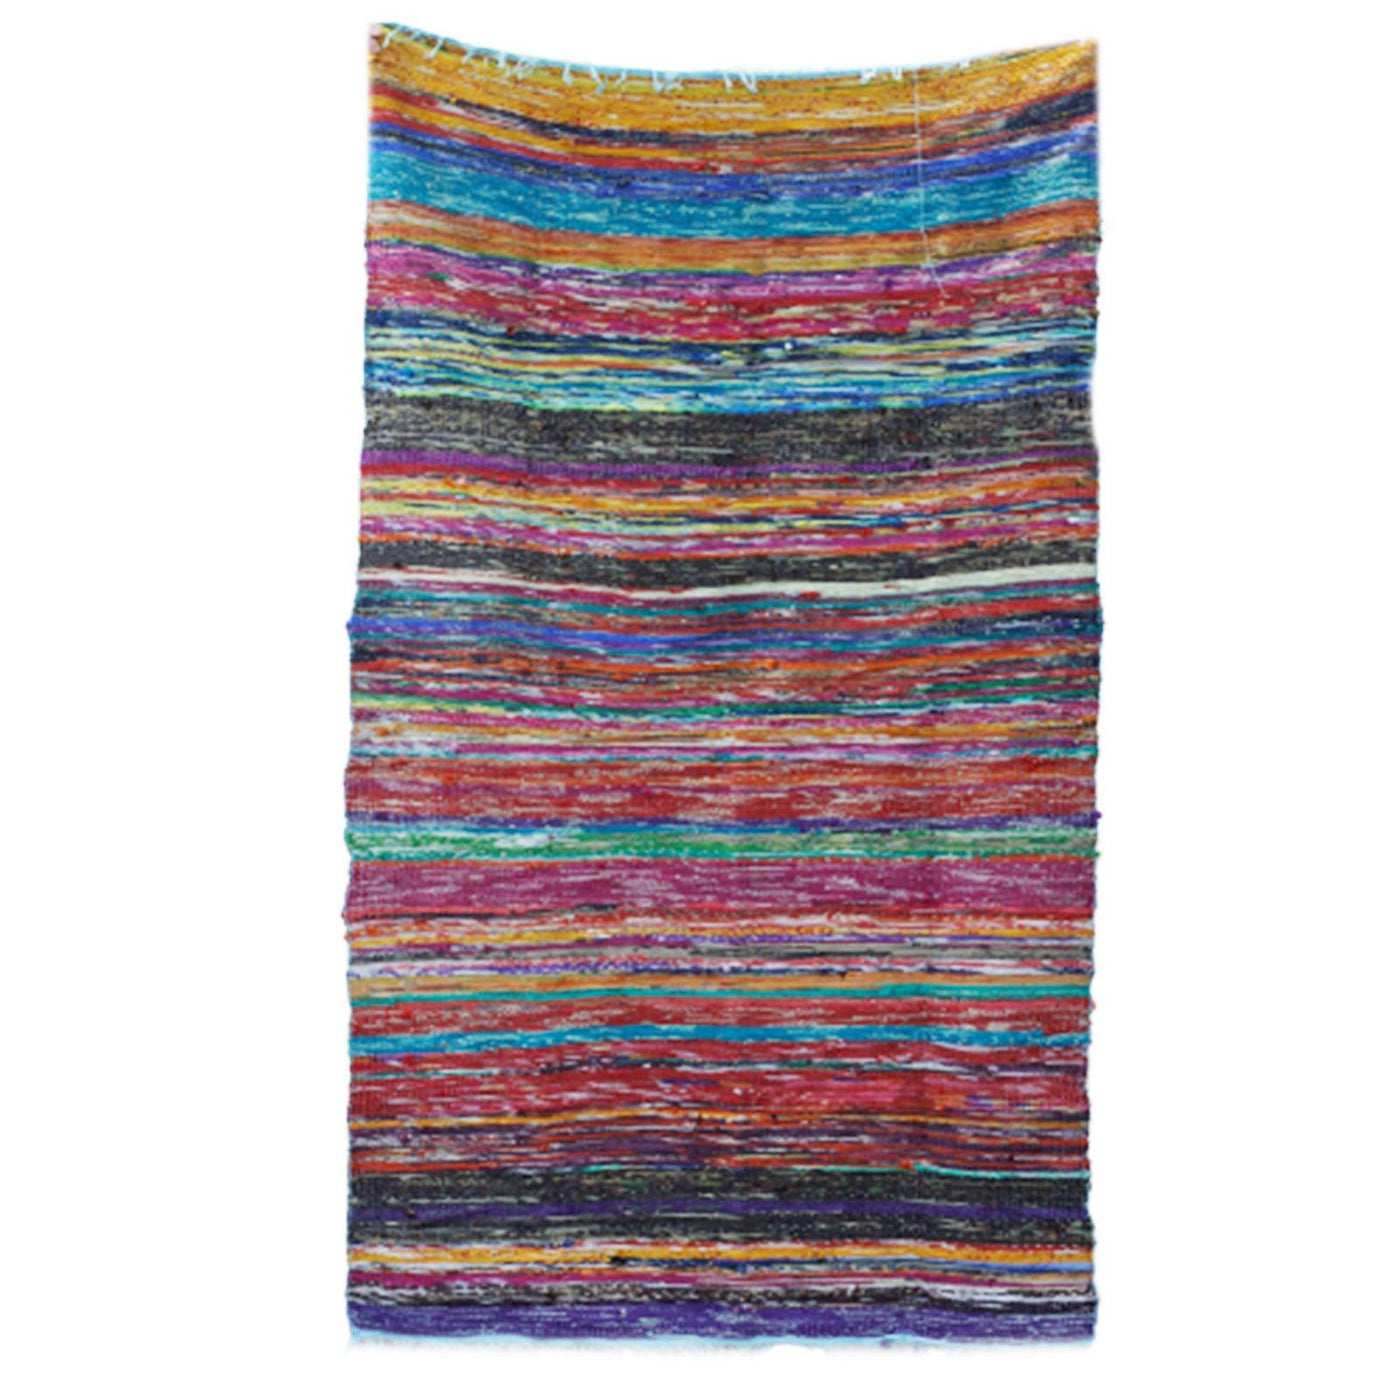  Eco Friendly Multicolours Stripped Indian Rag Rugs Blue Accent 153 x 90cm.